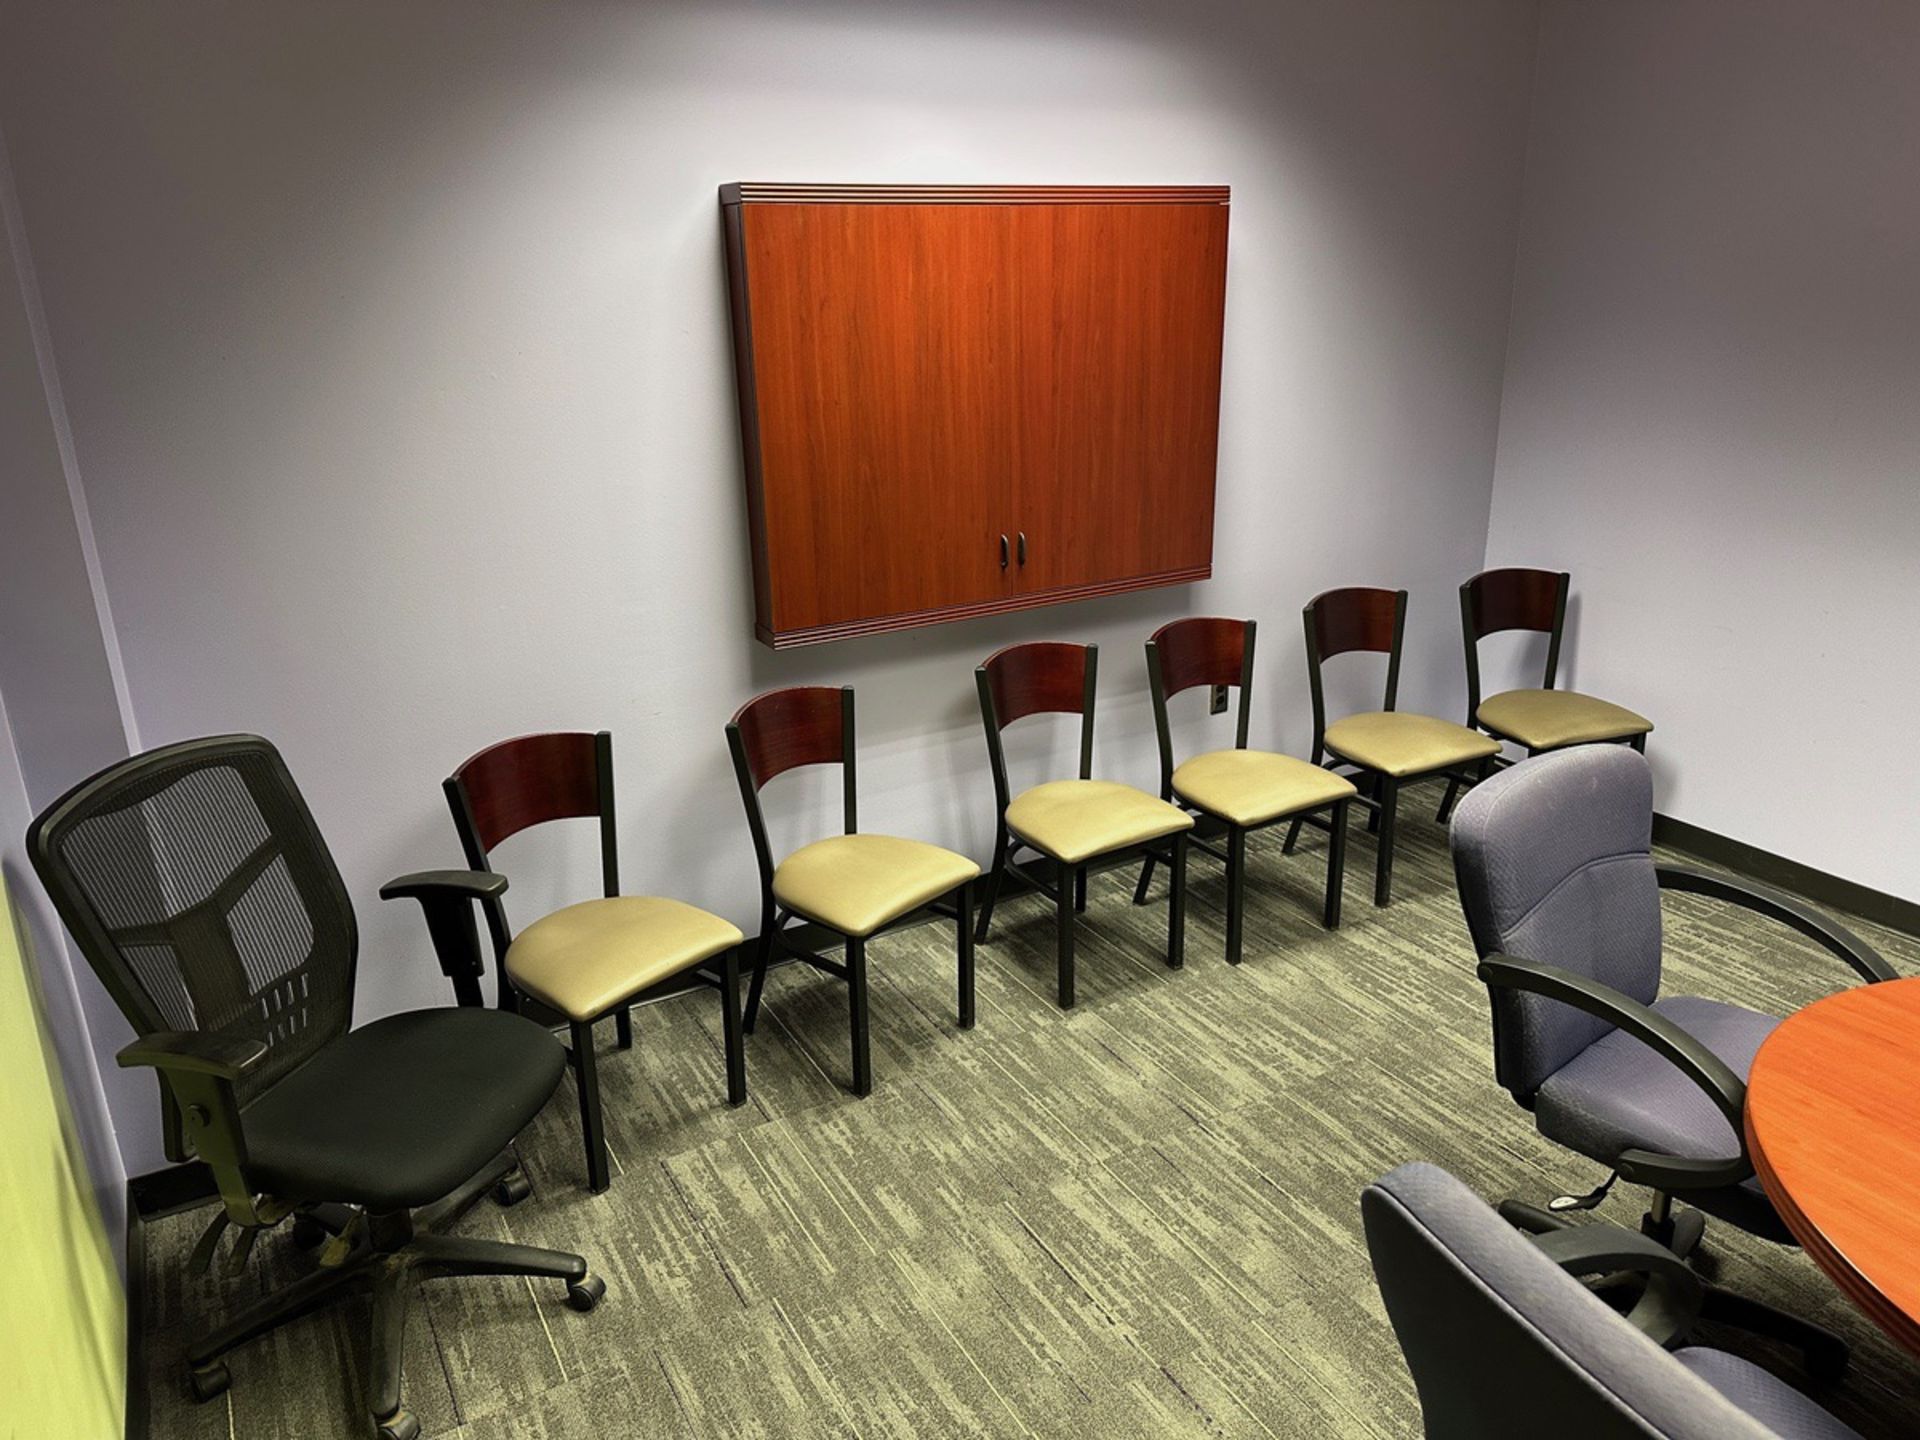 Lot of Contents of Conference Room | Rig Fee $500 - Image 3 of 3